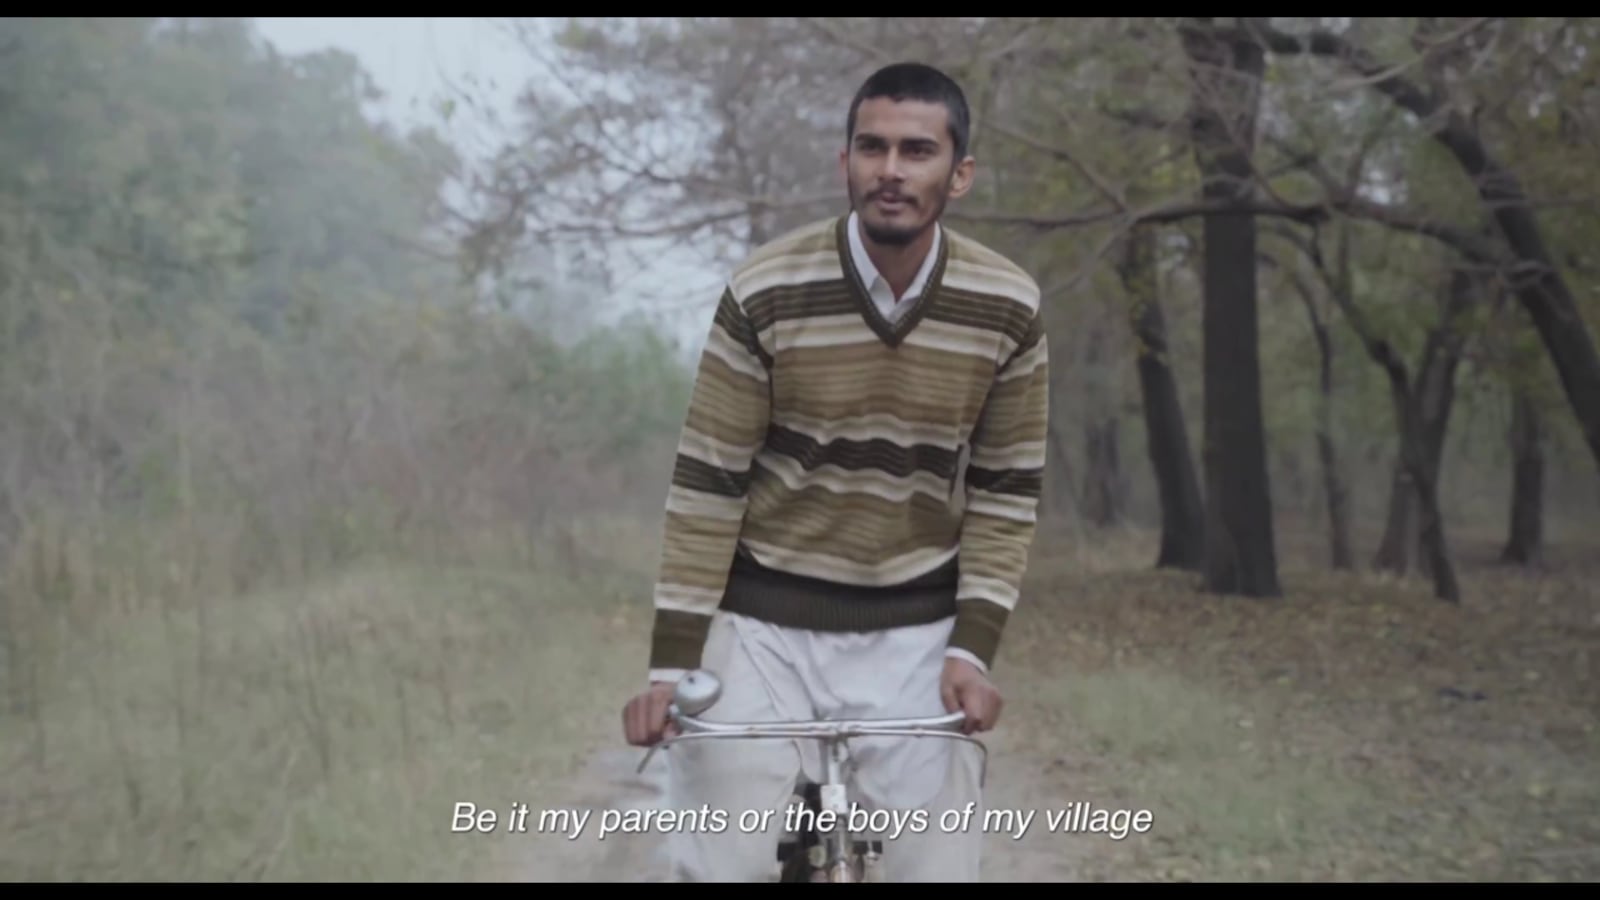 Punjabi feature 'Jaggi' is a comment on hypermasculinity, homophobia, and  shame